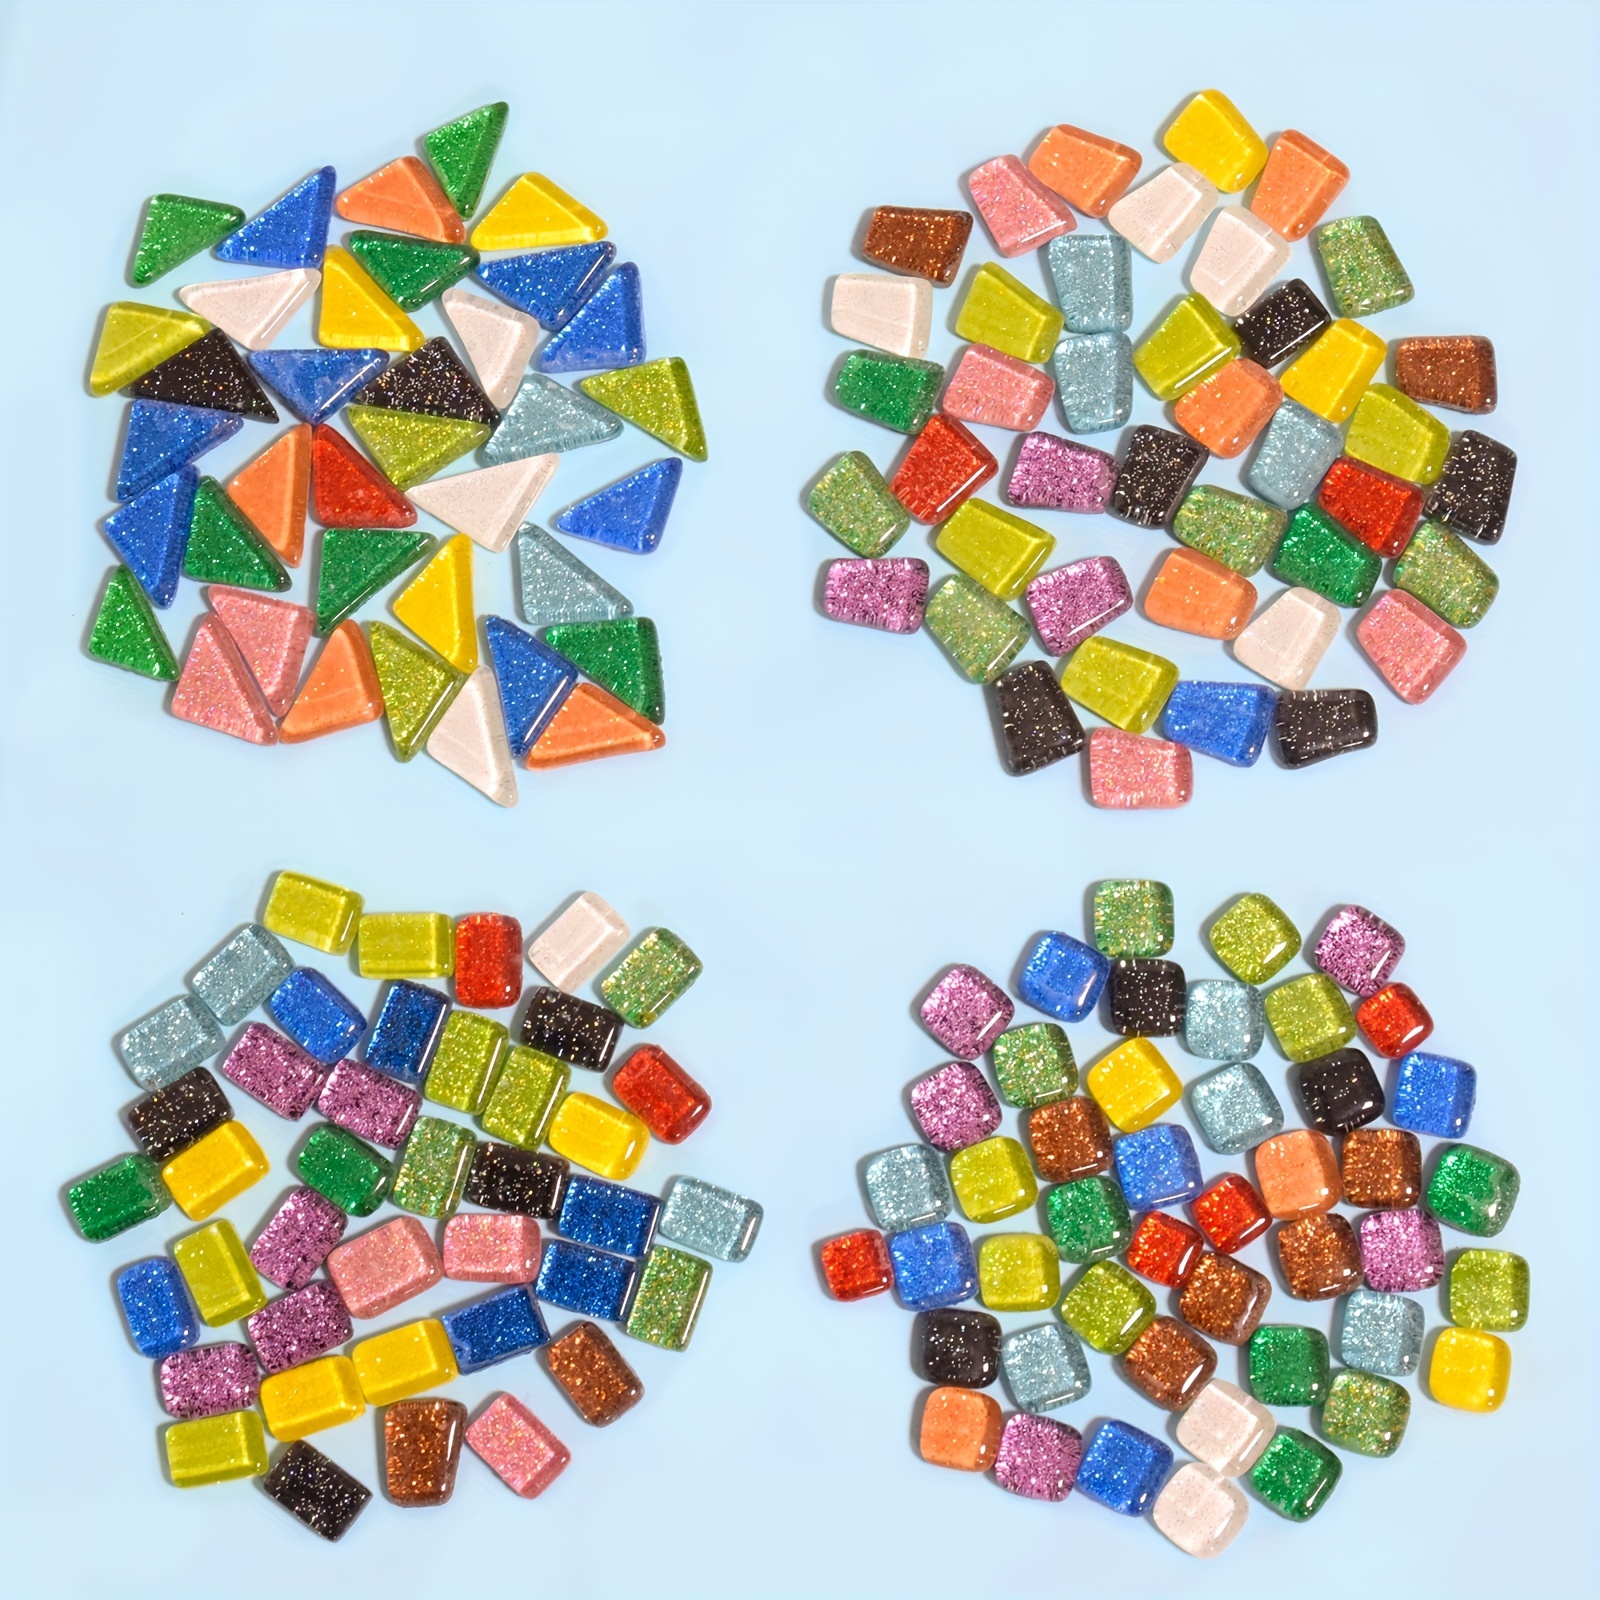 DIY Glass Mosaic Tiles for Crafts,Mixed Color Mosaic Kits with Wooden